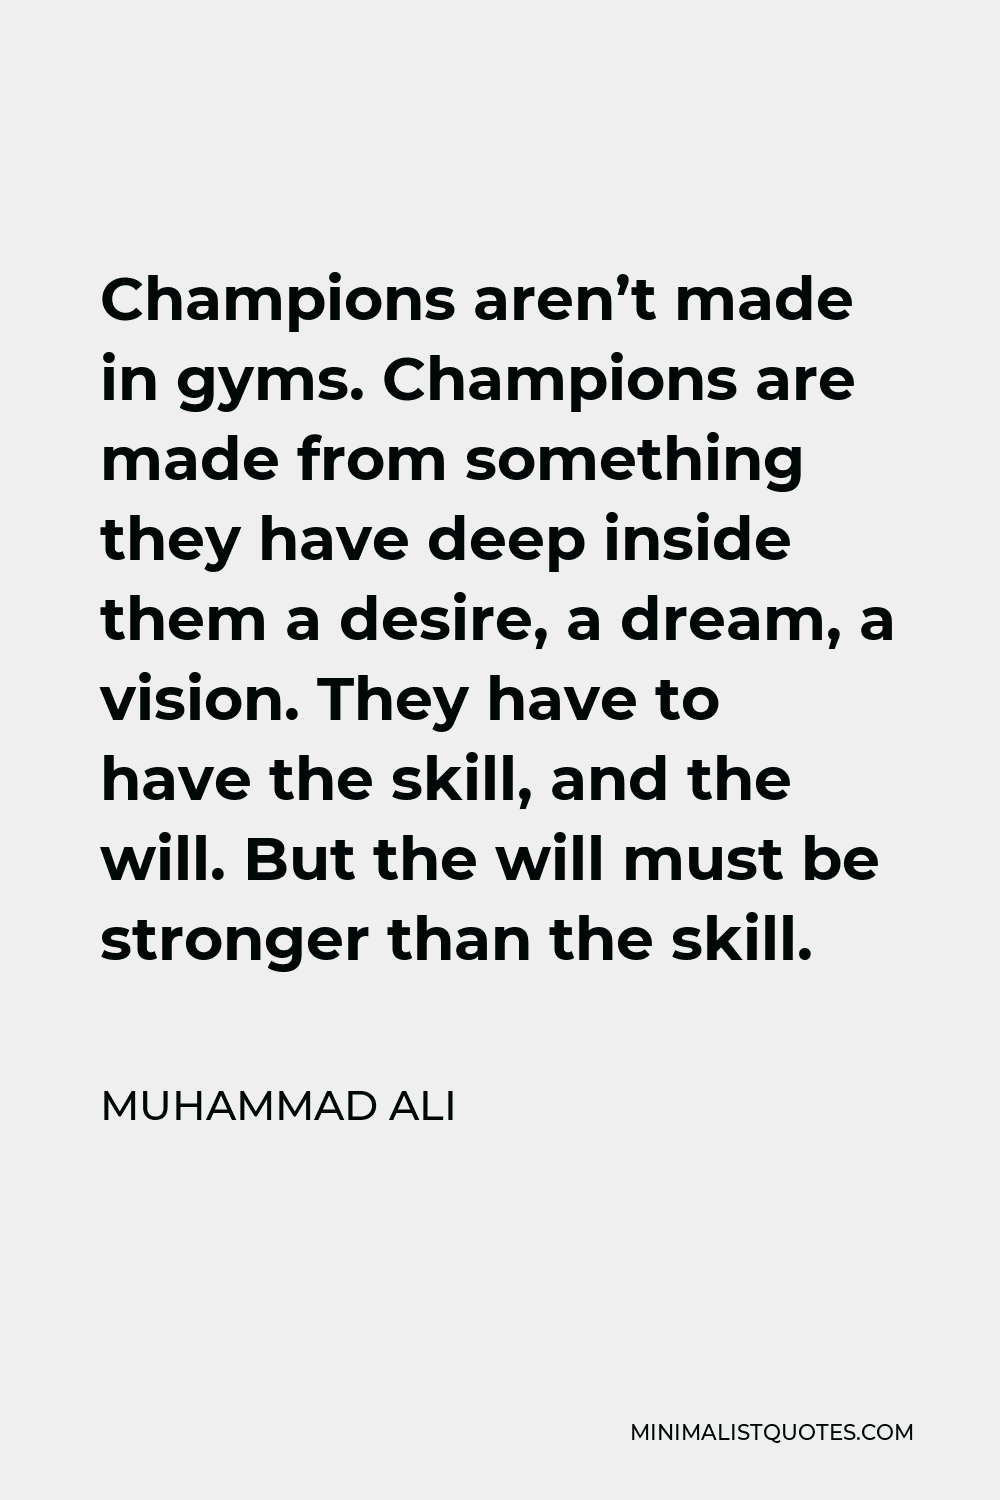 Muhammad Ali Quote - Champions aren’t made in gyms. Champions are made from something they have deep inside them a desire, a dream, a vision. They have to have the skill, and the will. But the will must be stronger than the skill.